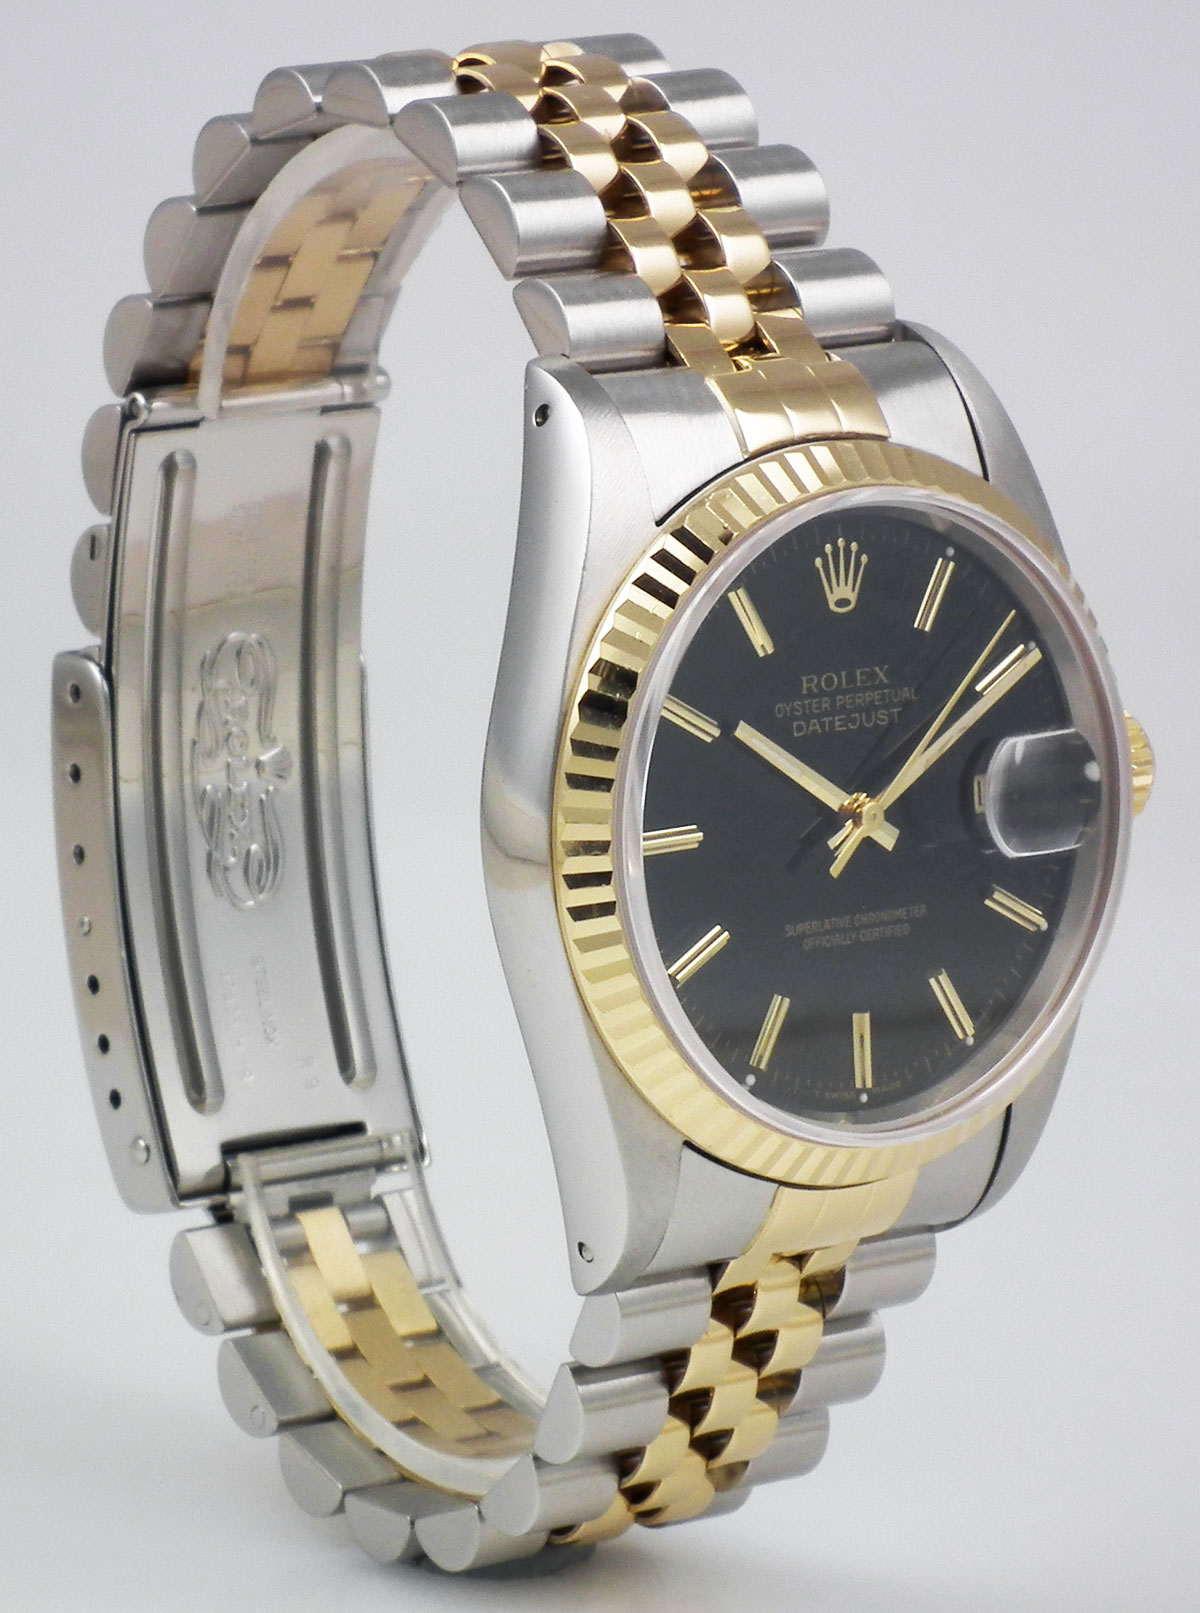 Rolex Oyster Perpetual DateJust 18K/SS - Stunning Black Dial (1991)